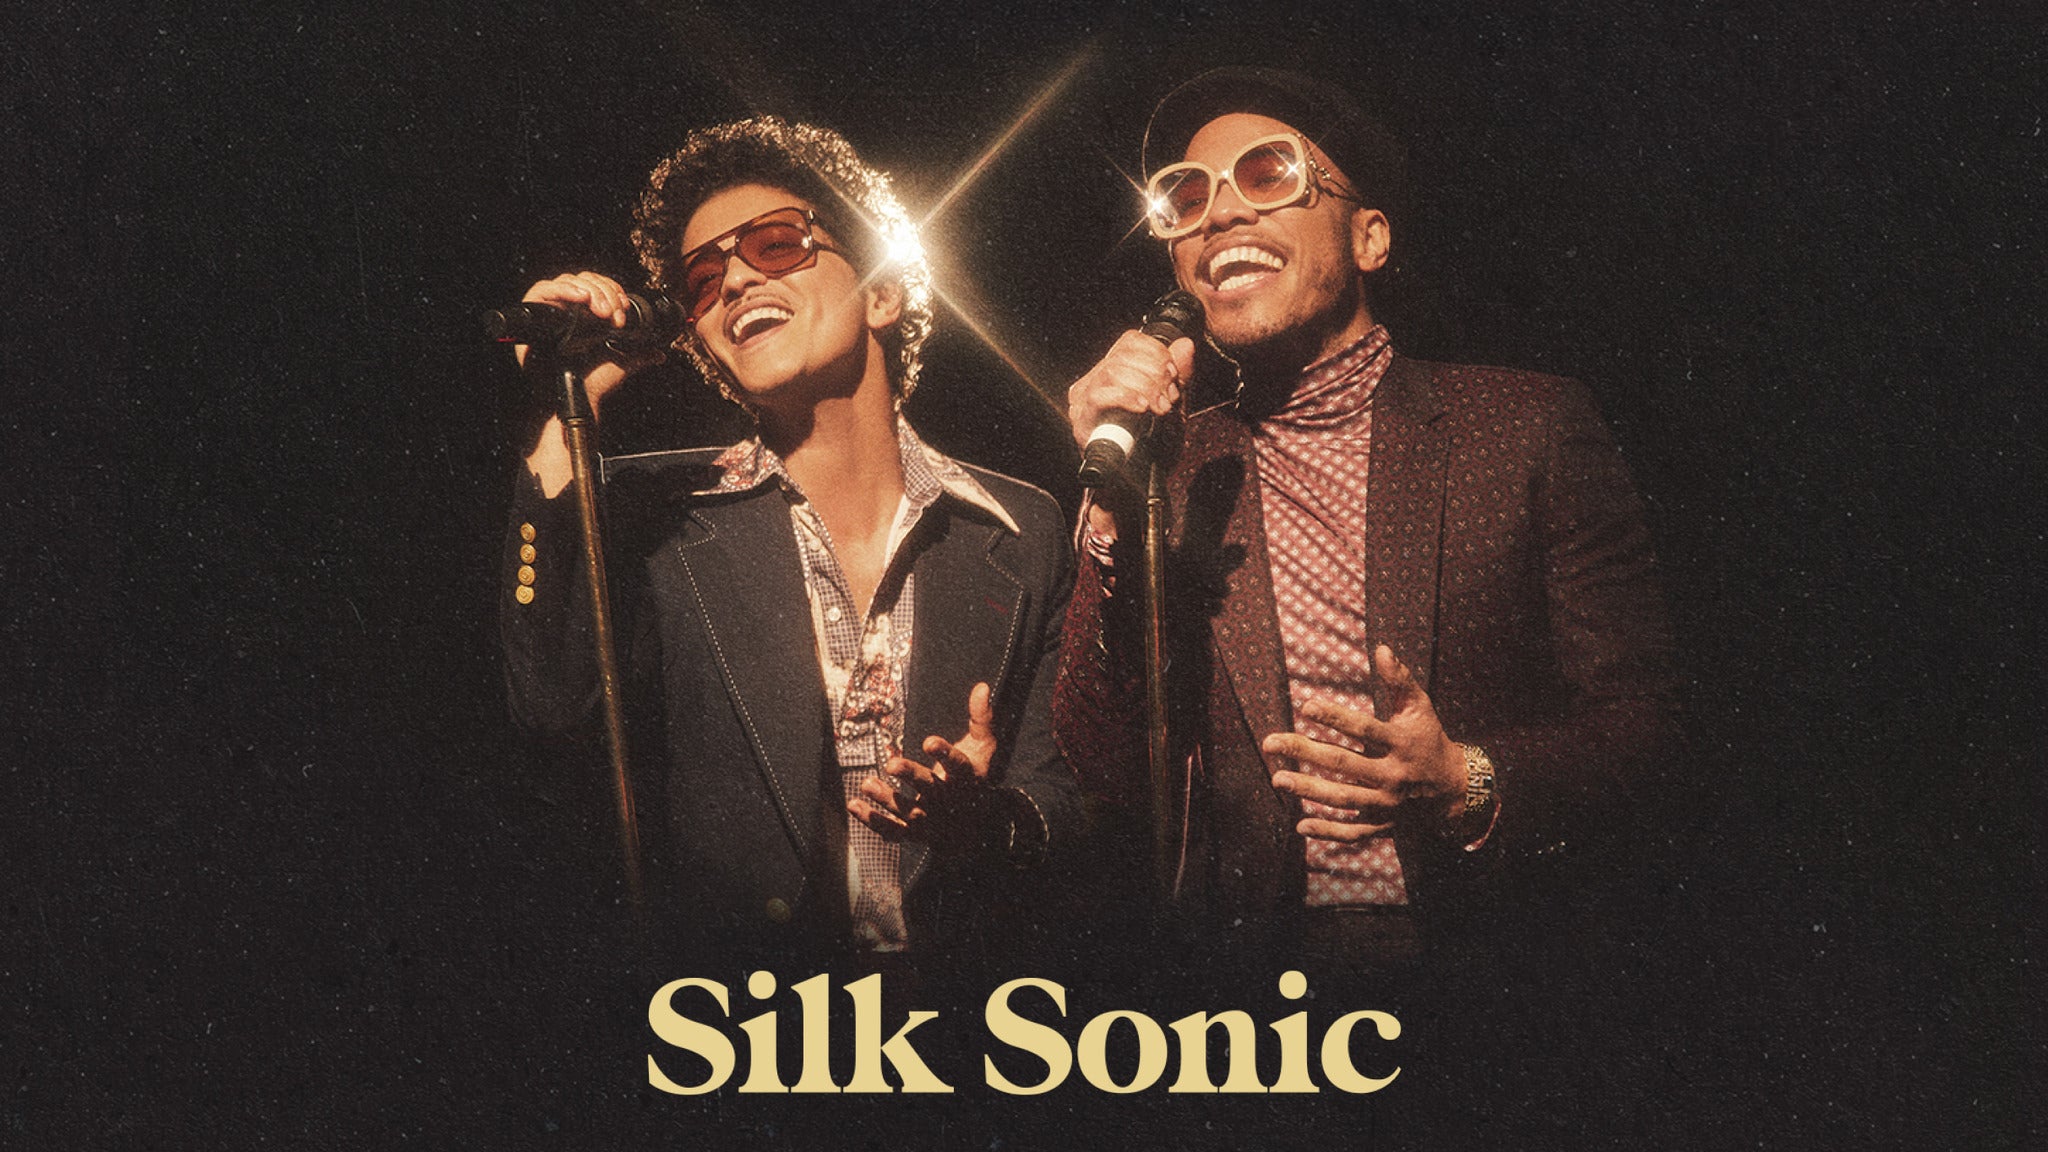 An Evening with Silk Sonic in Las Vegas promo photo for Artist presale offer code